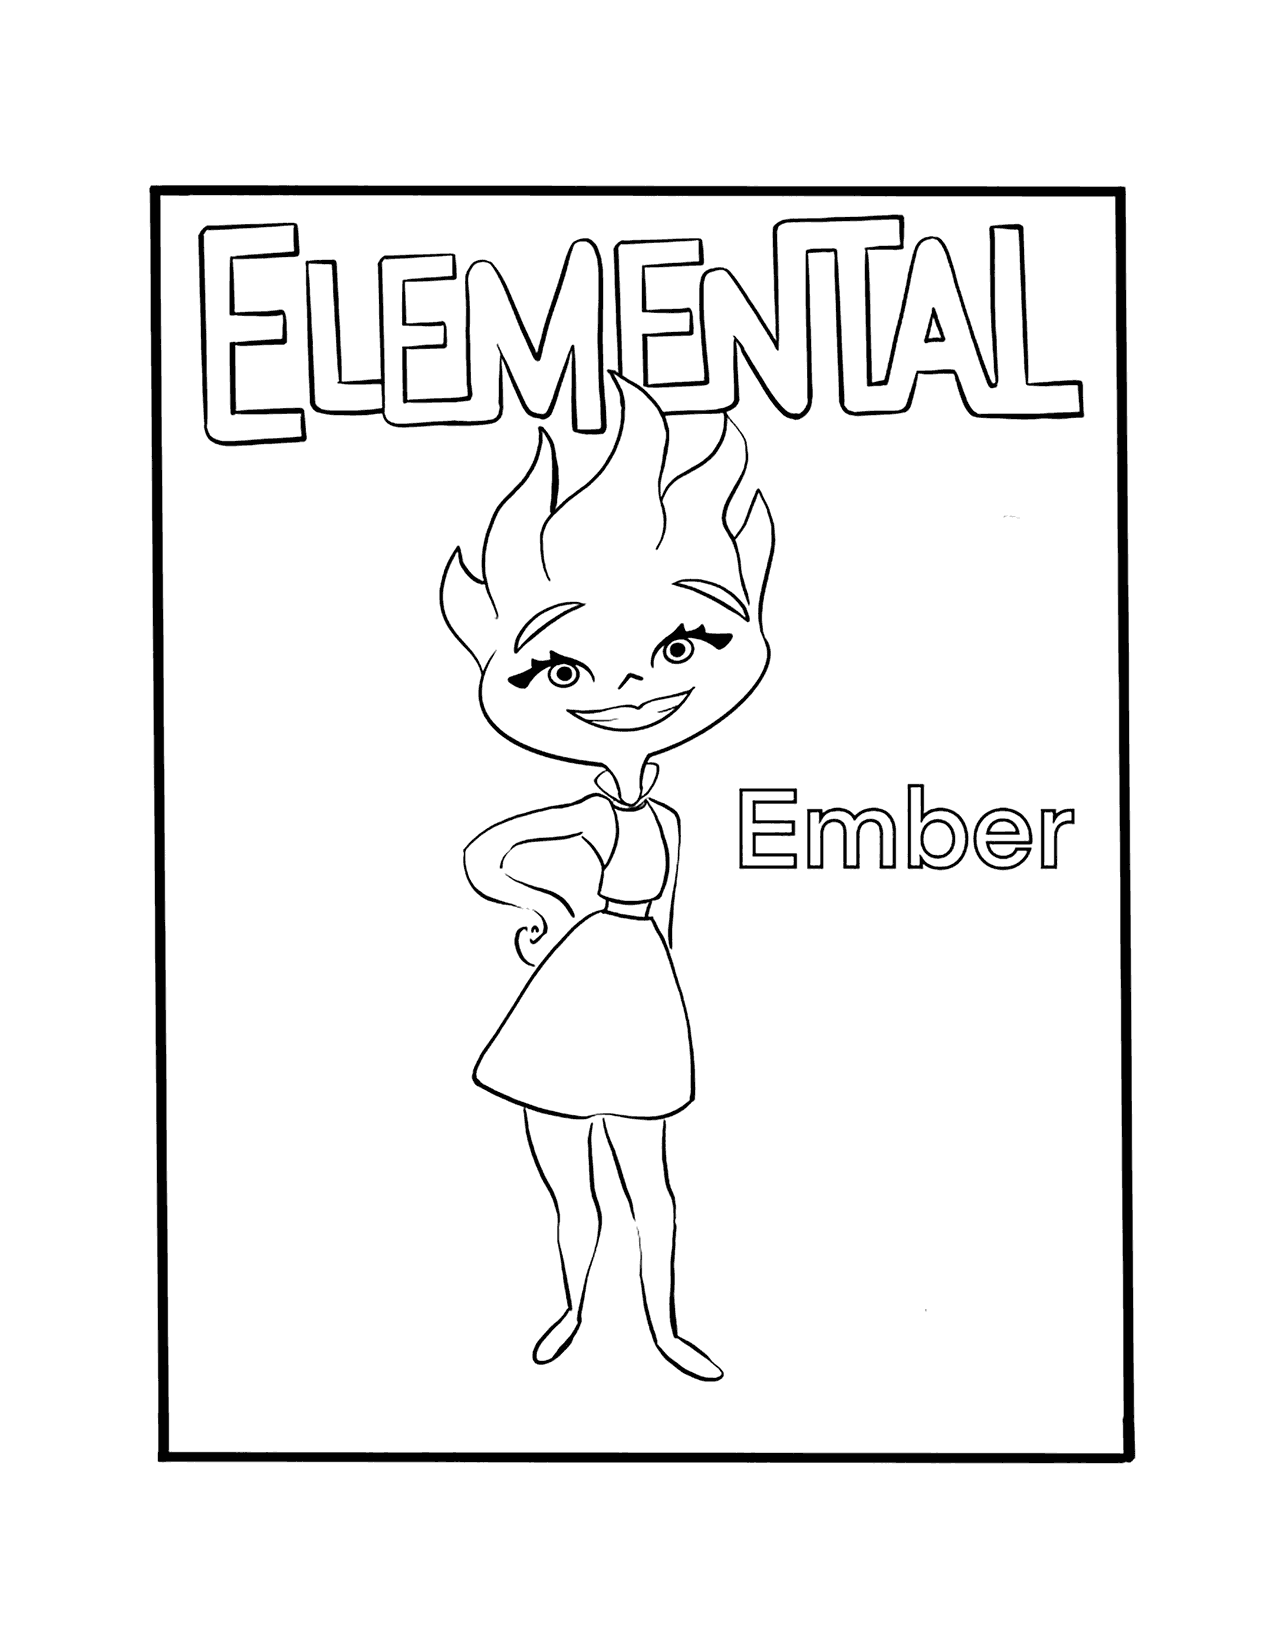 Ember From Elemental Coloring Page